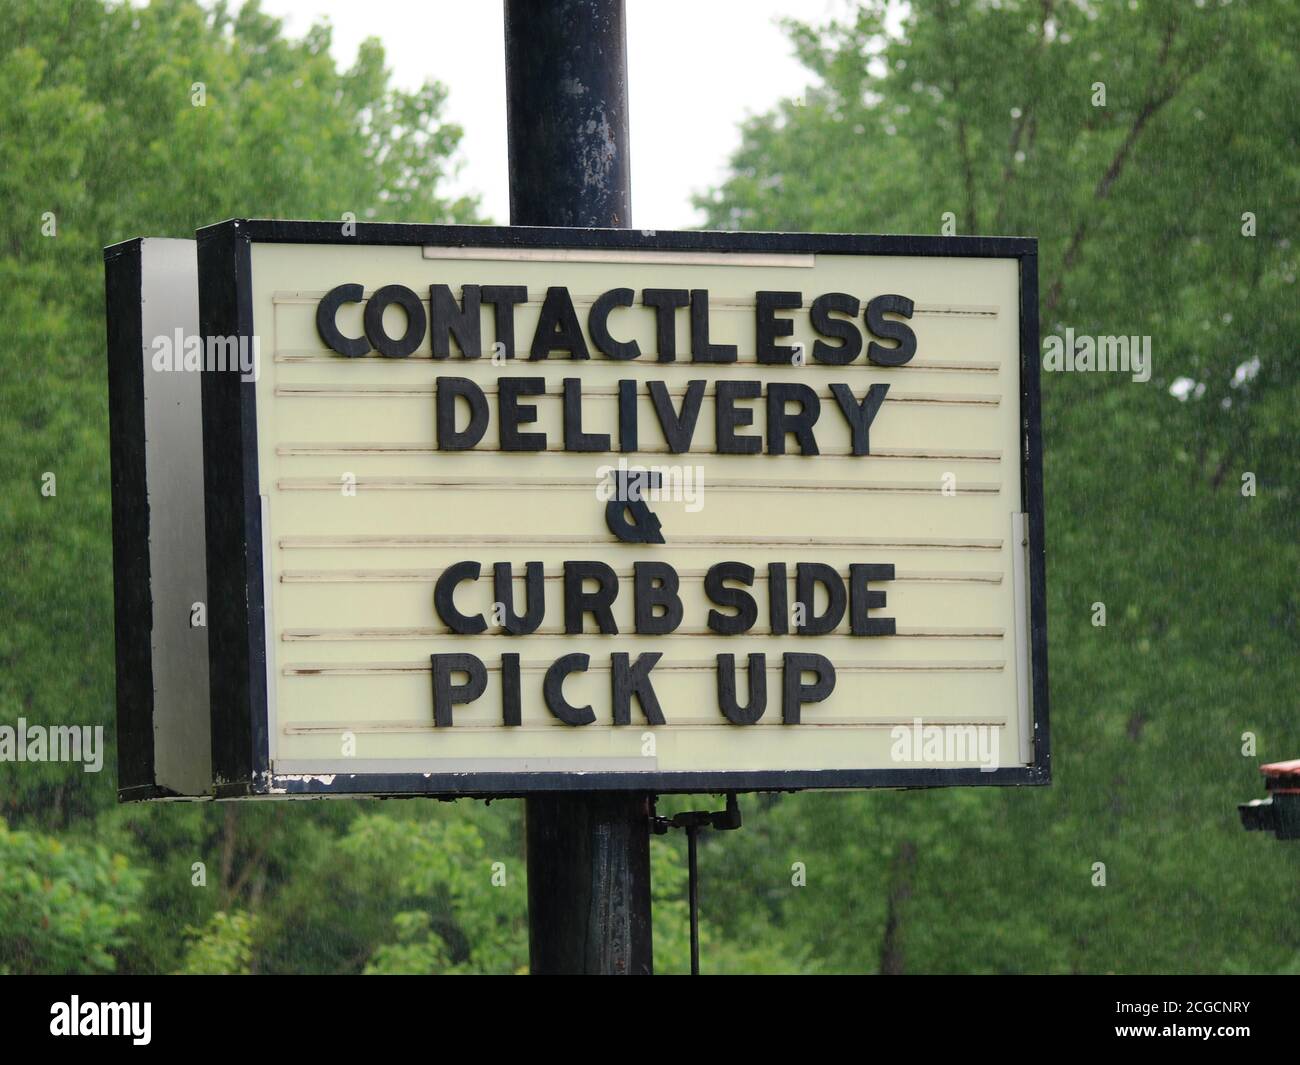 Business sign during the Summer of 2020 Covid-19 era says they offer Contactless Delivery and Curbside Pick Up to reopen safely and protect customers Stock Photo